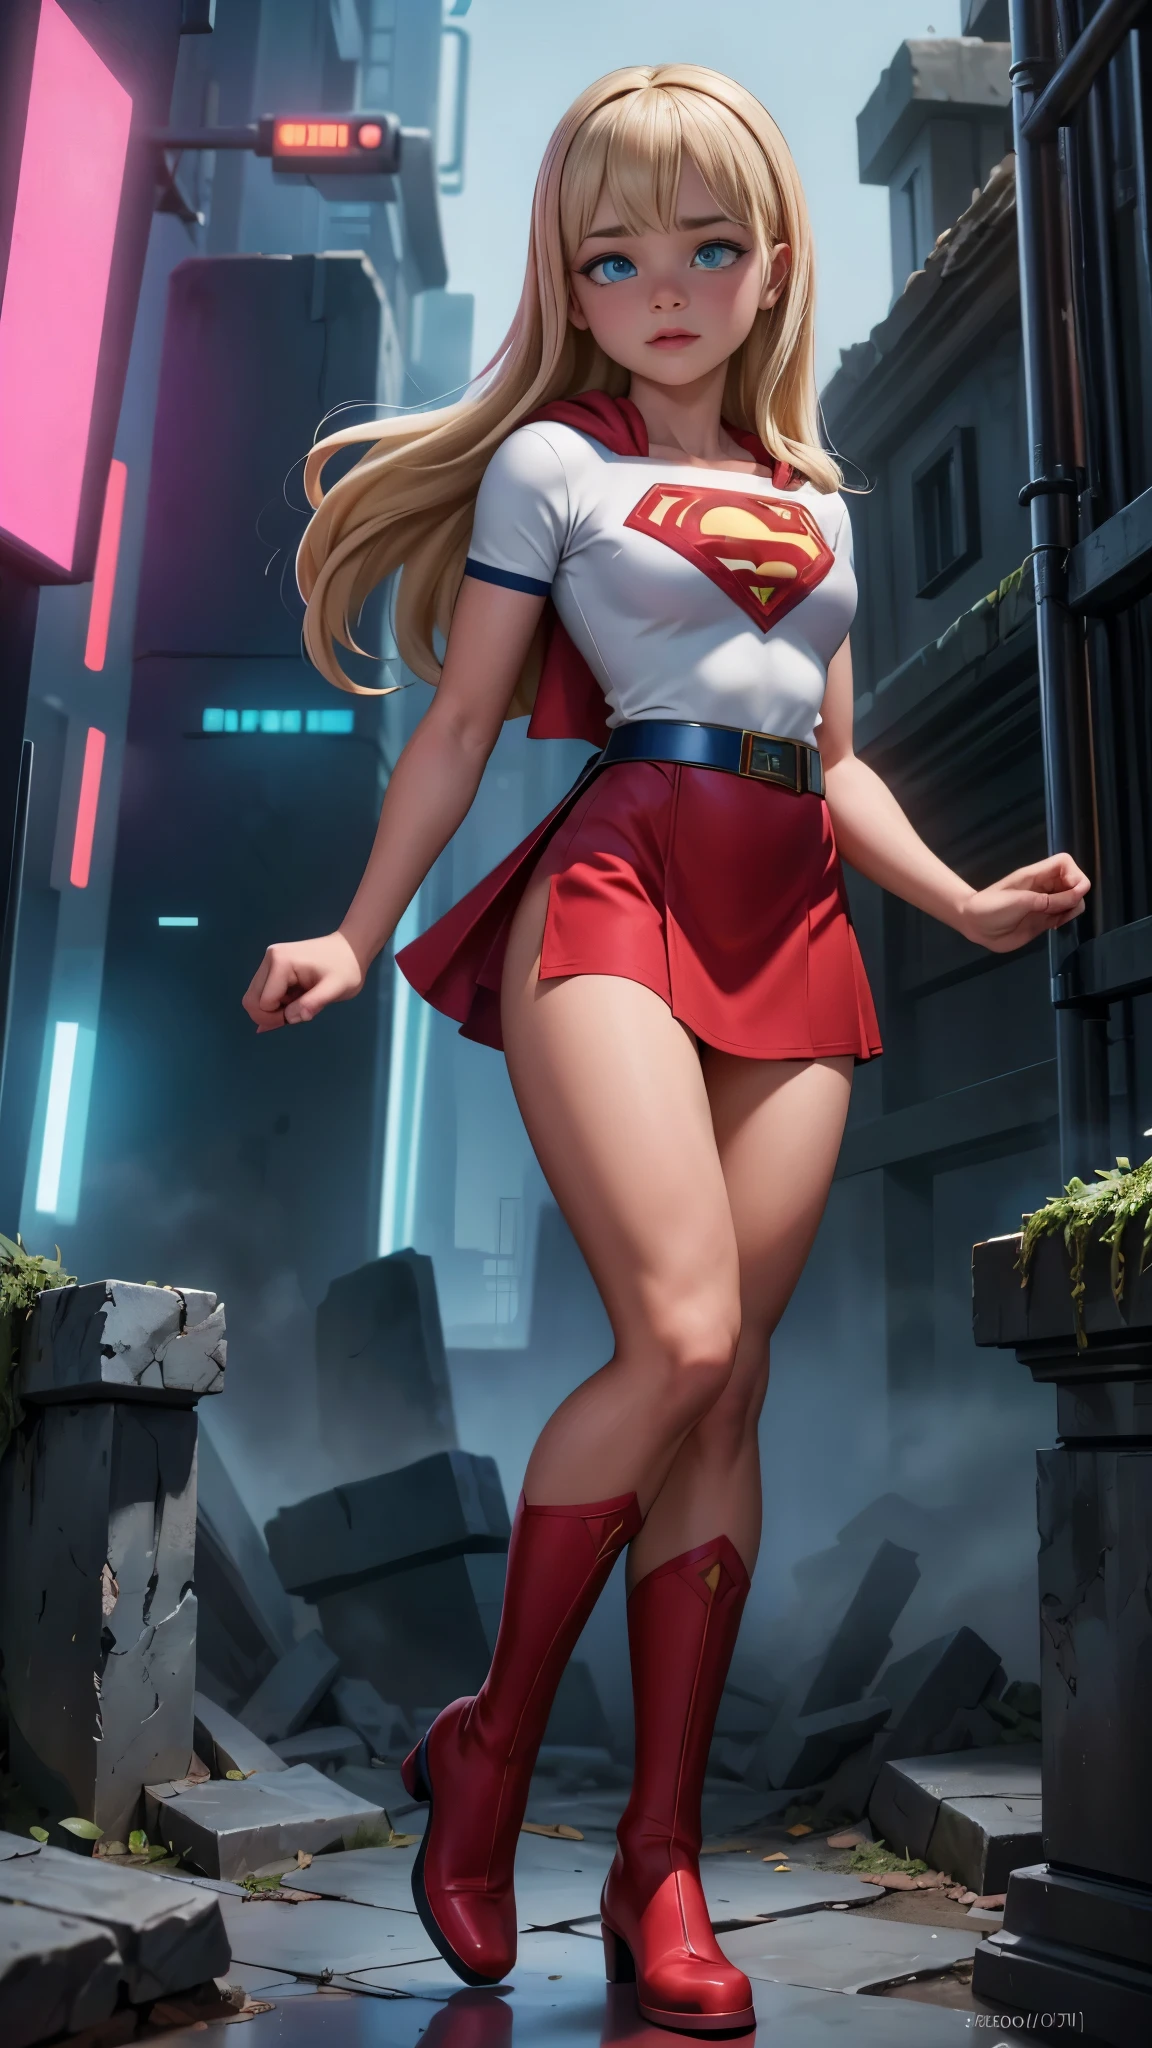 8K, Ultra HD, super details, high quality, high resolution. The heroine Supergirl looks beautiful in a full-length photo, her body is sculptural, her long wavy blonde hair is radiant in a perfect combination with her white skin, her bright blonde eyes mesmerize everyone. She is wearing her heroine outfit, a red skirt with a yellow belt, a very tight blue t-shirt with a big red S on the chest, Elta also wears a red cape and red boots. she looks very sexy drawing attention to her big breasts and thick legs as she flies through the sky.,(Fondo de ruinas de mazmorra en ruinas cyberpunk :1.4 ), (supergils superman :1.4), (vestuario white traje :1.4), (Detalles de la cara: 1.5, ojos azules brillantes, hermoso rostro, ojos bonitos, Contorno del iris, labios delgados: 1.5, Thin, sharp pale eyebrows, Long, dark eyelashes, double tabs),(Traje vestuario white :1.4) 